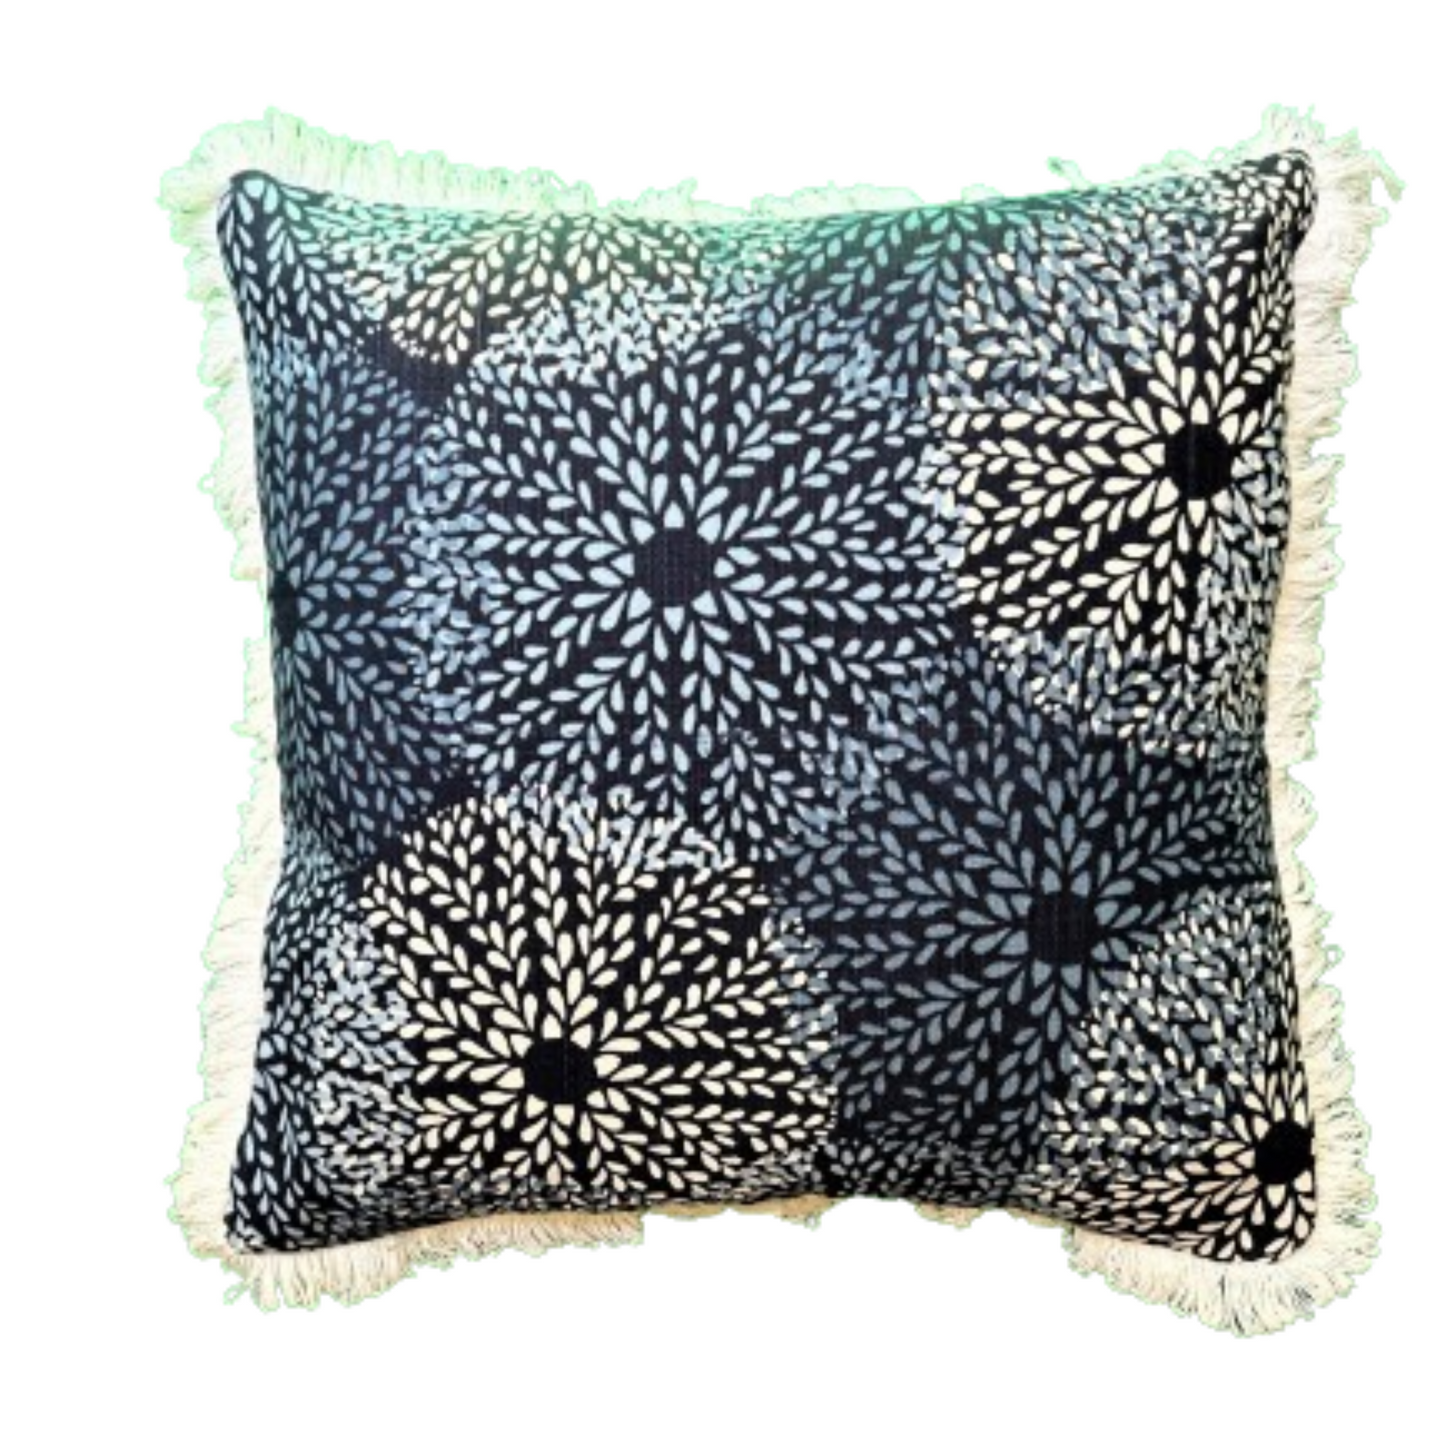 CHAND INDIGO BLUE AND WHITE HAND BLOCK 18 X 18 DECORATIVE SQUARE PILLOW with Down Feather Insert